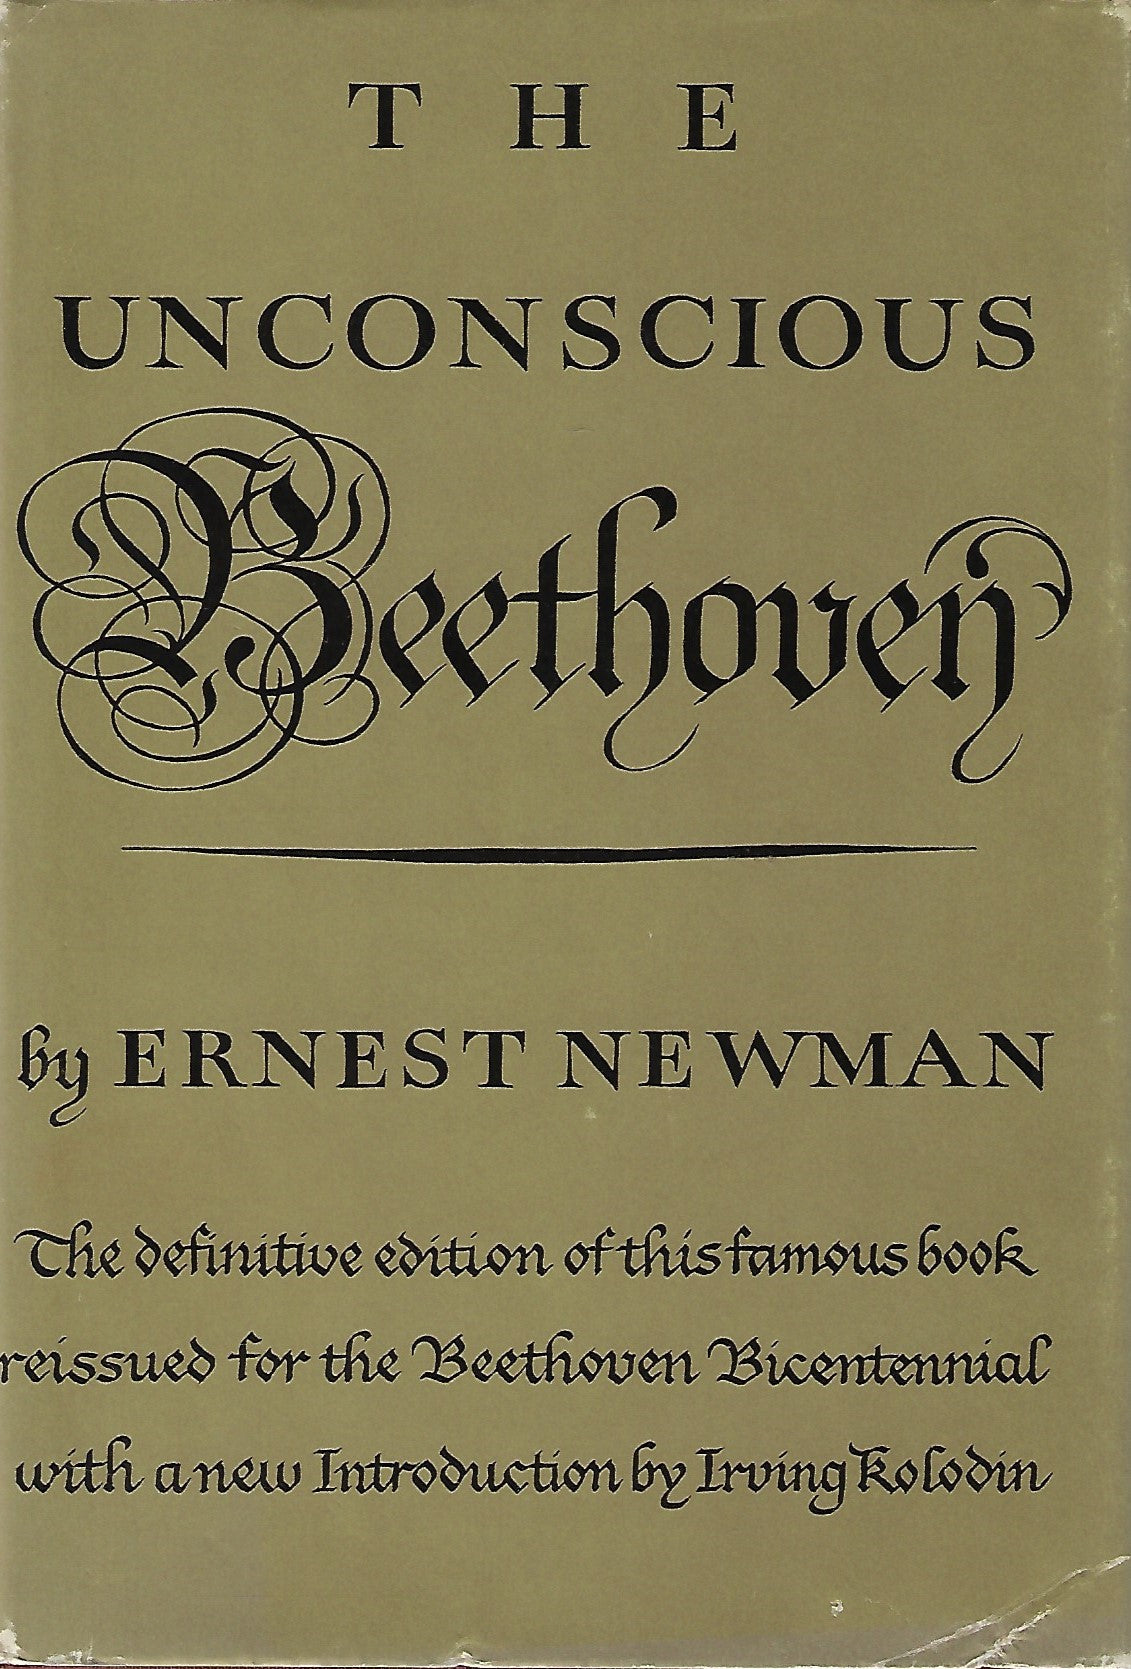 The unconscious Beethoven